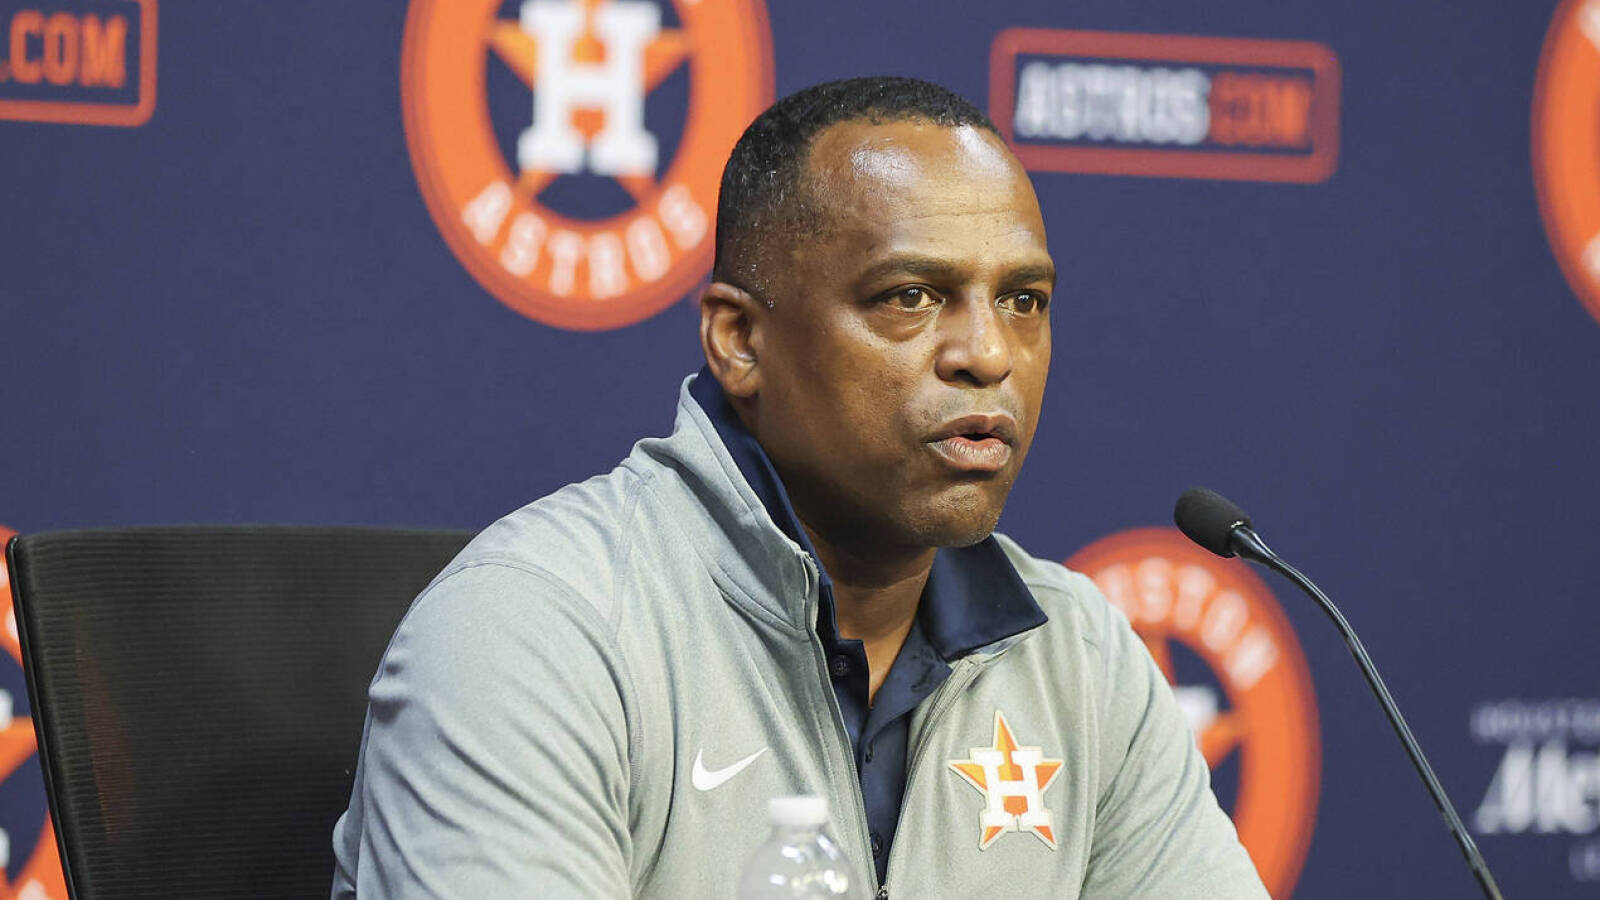 Astros GM makes revealing comments about team's trade-deadline strategy amid poor start